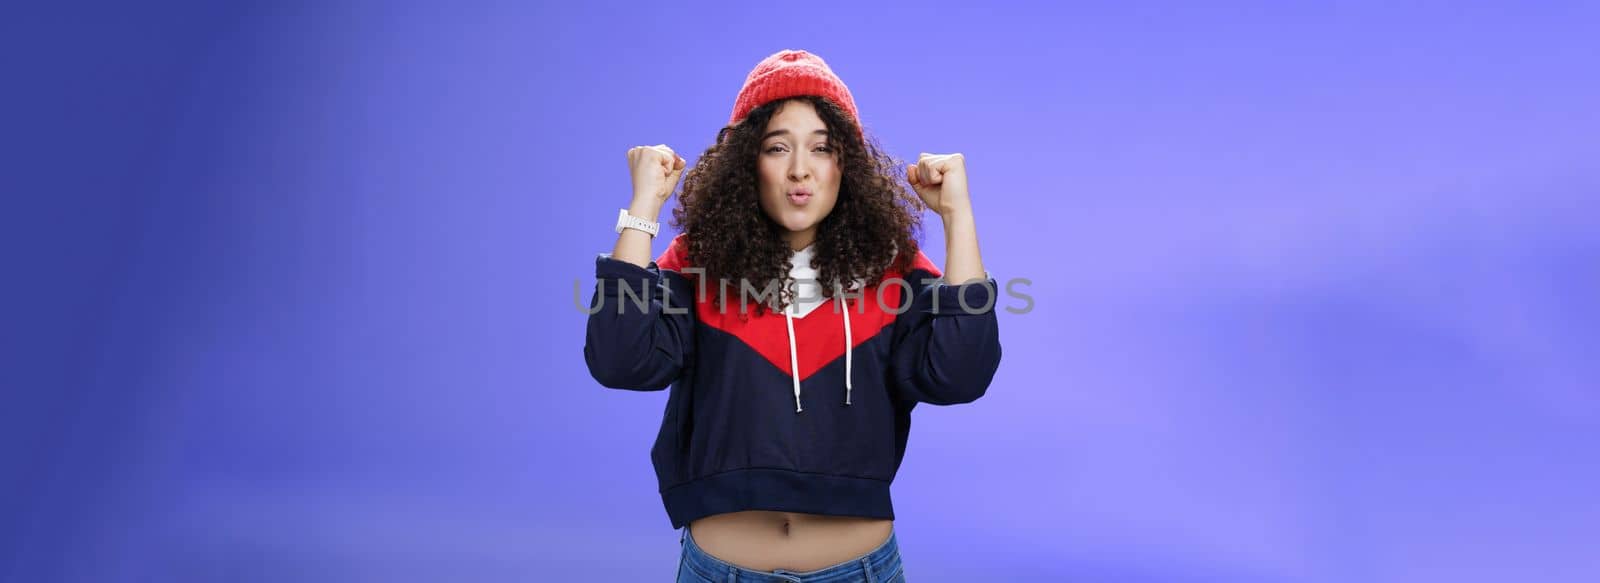 Charming young 20s girl with curly hair in warm beanie raising hands as belly showing under sweatshirt triumphing, celebrating awesome win folding lips from joy and excitement over blue background.